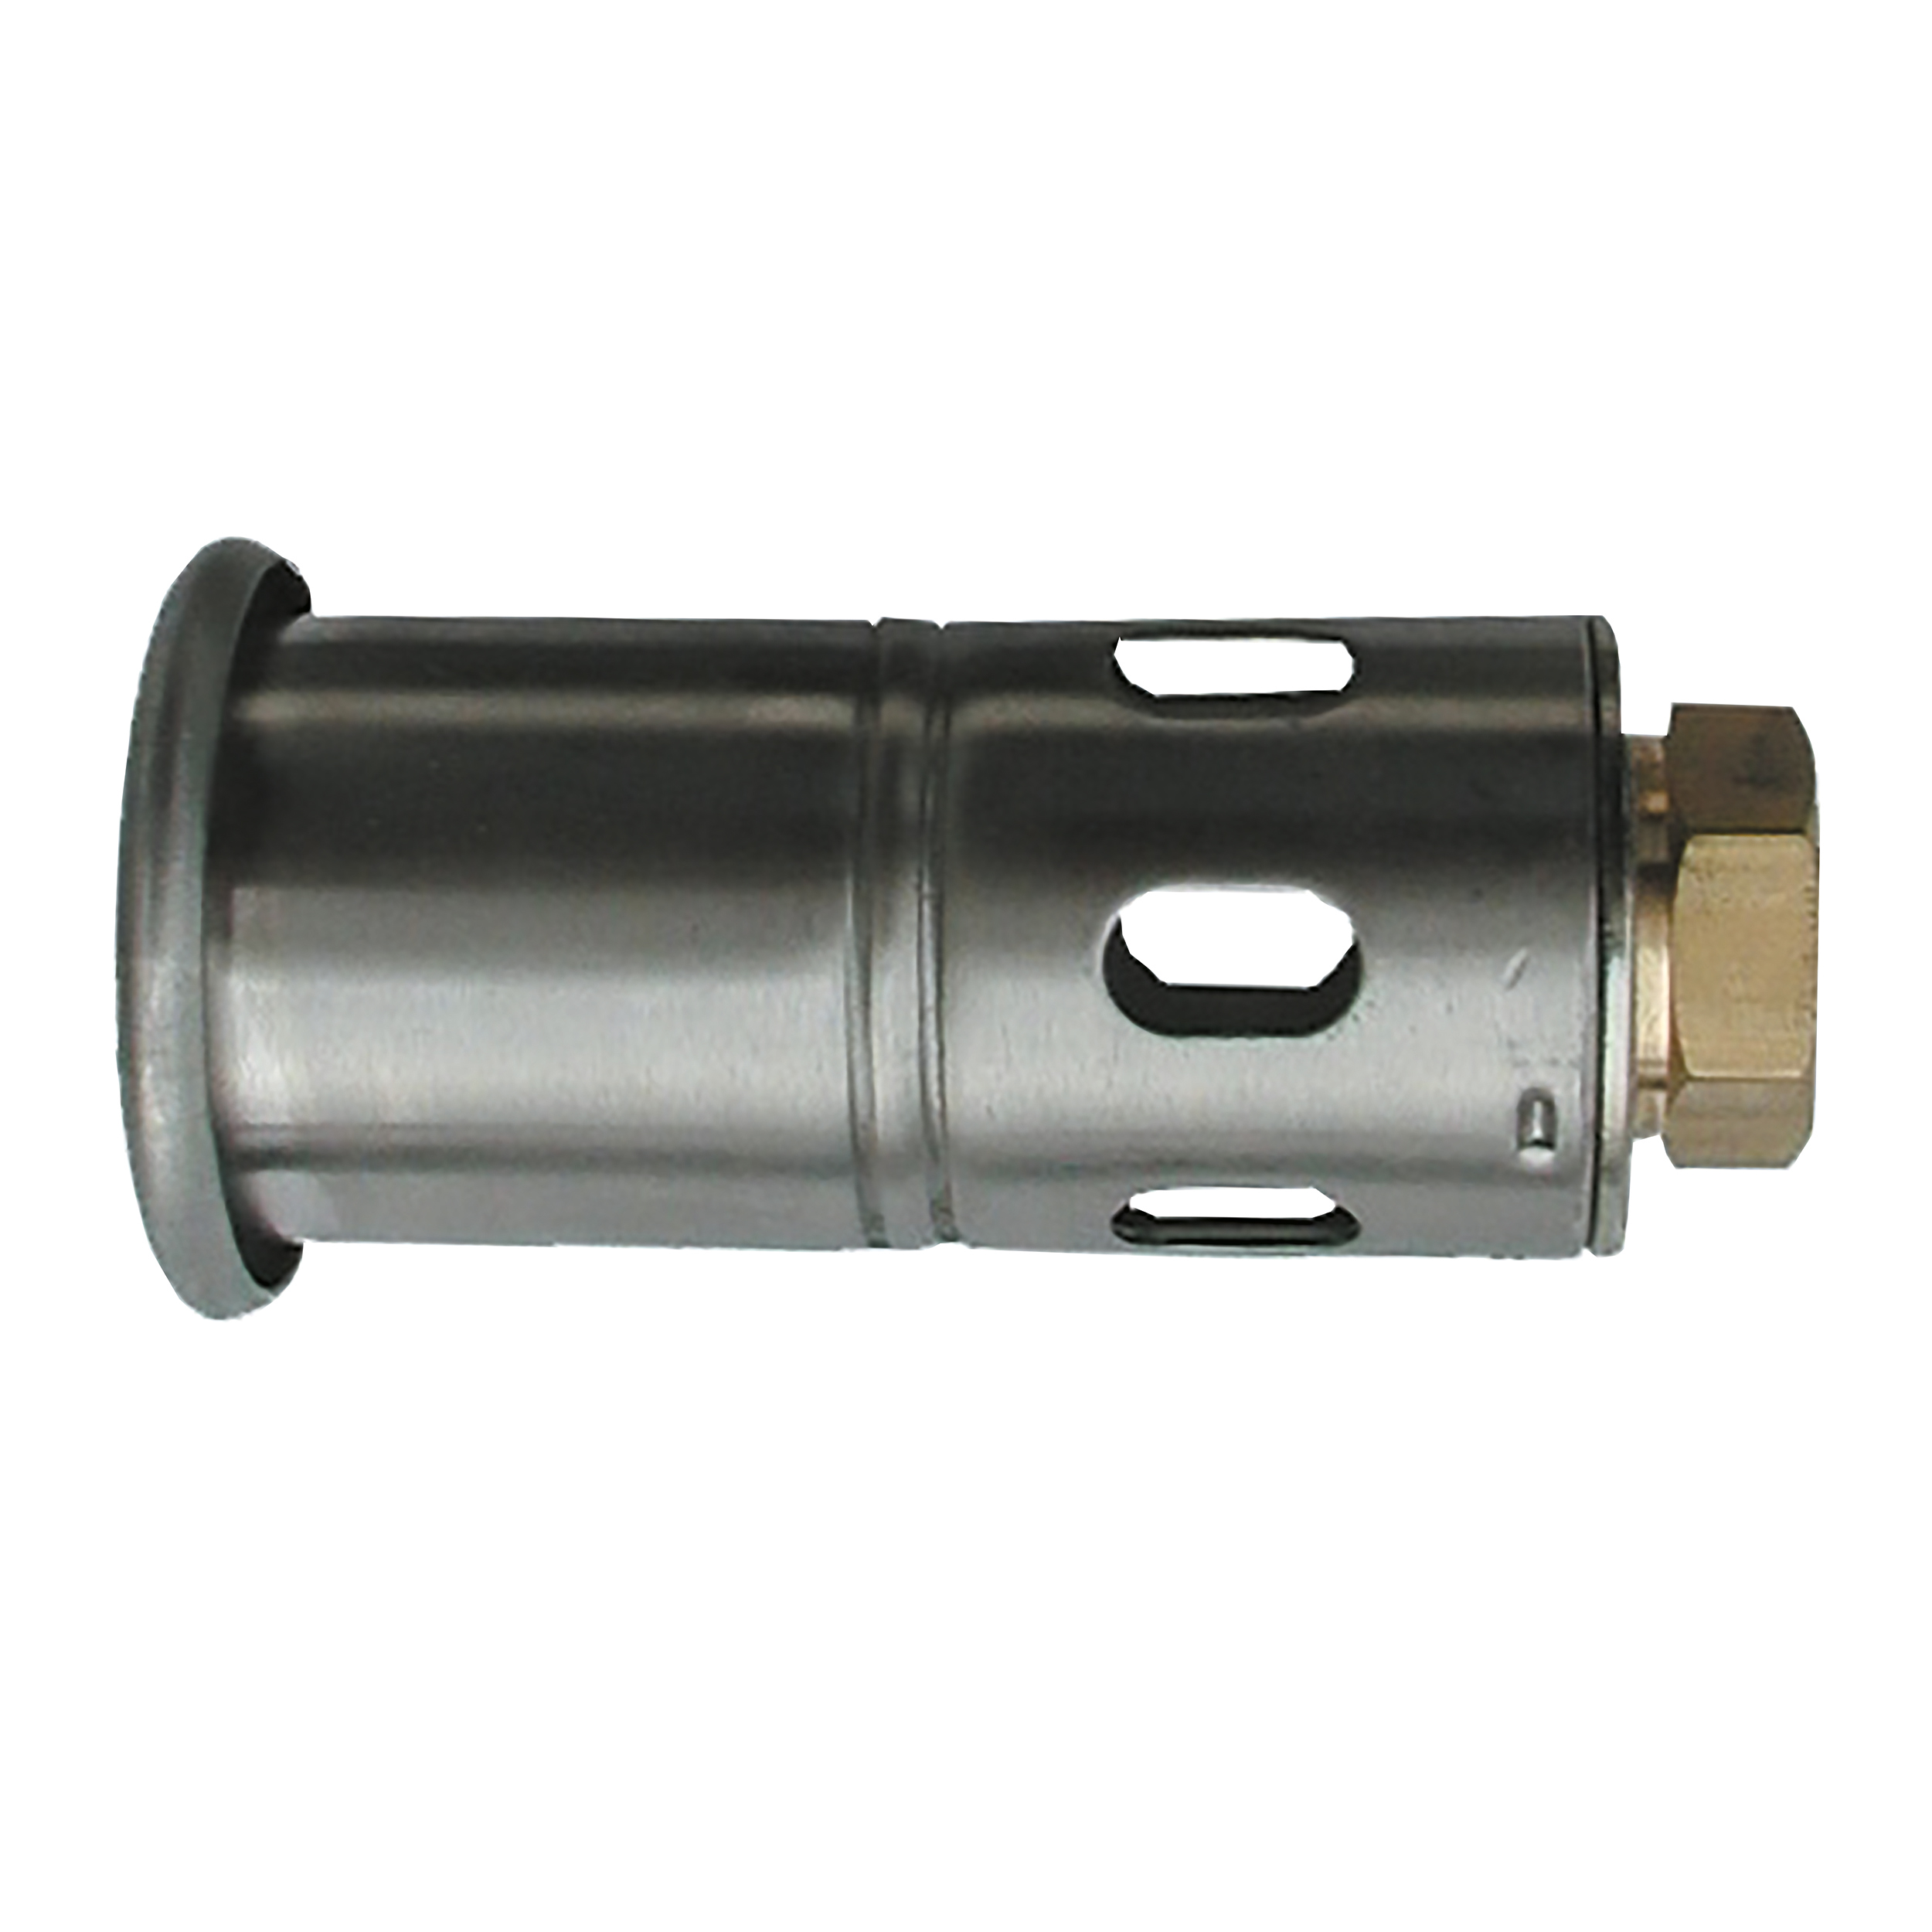 Stainless steel torch heads